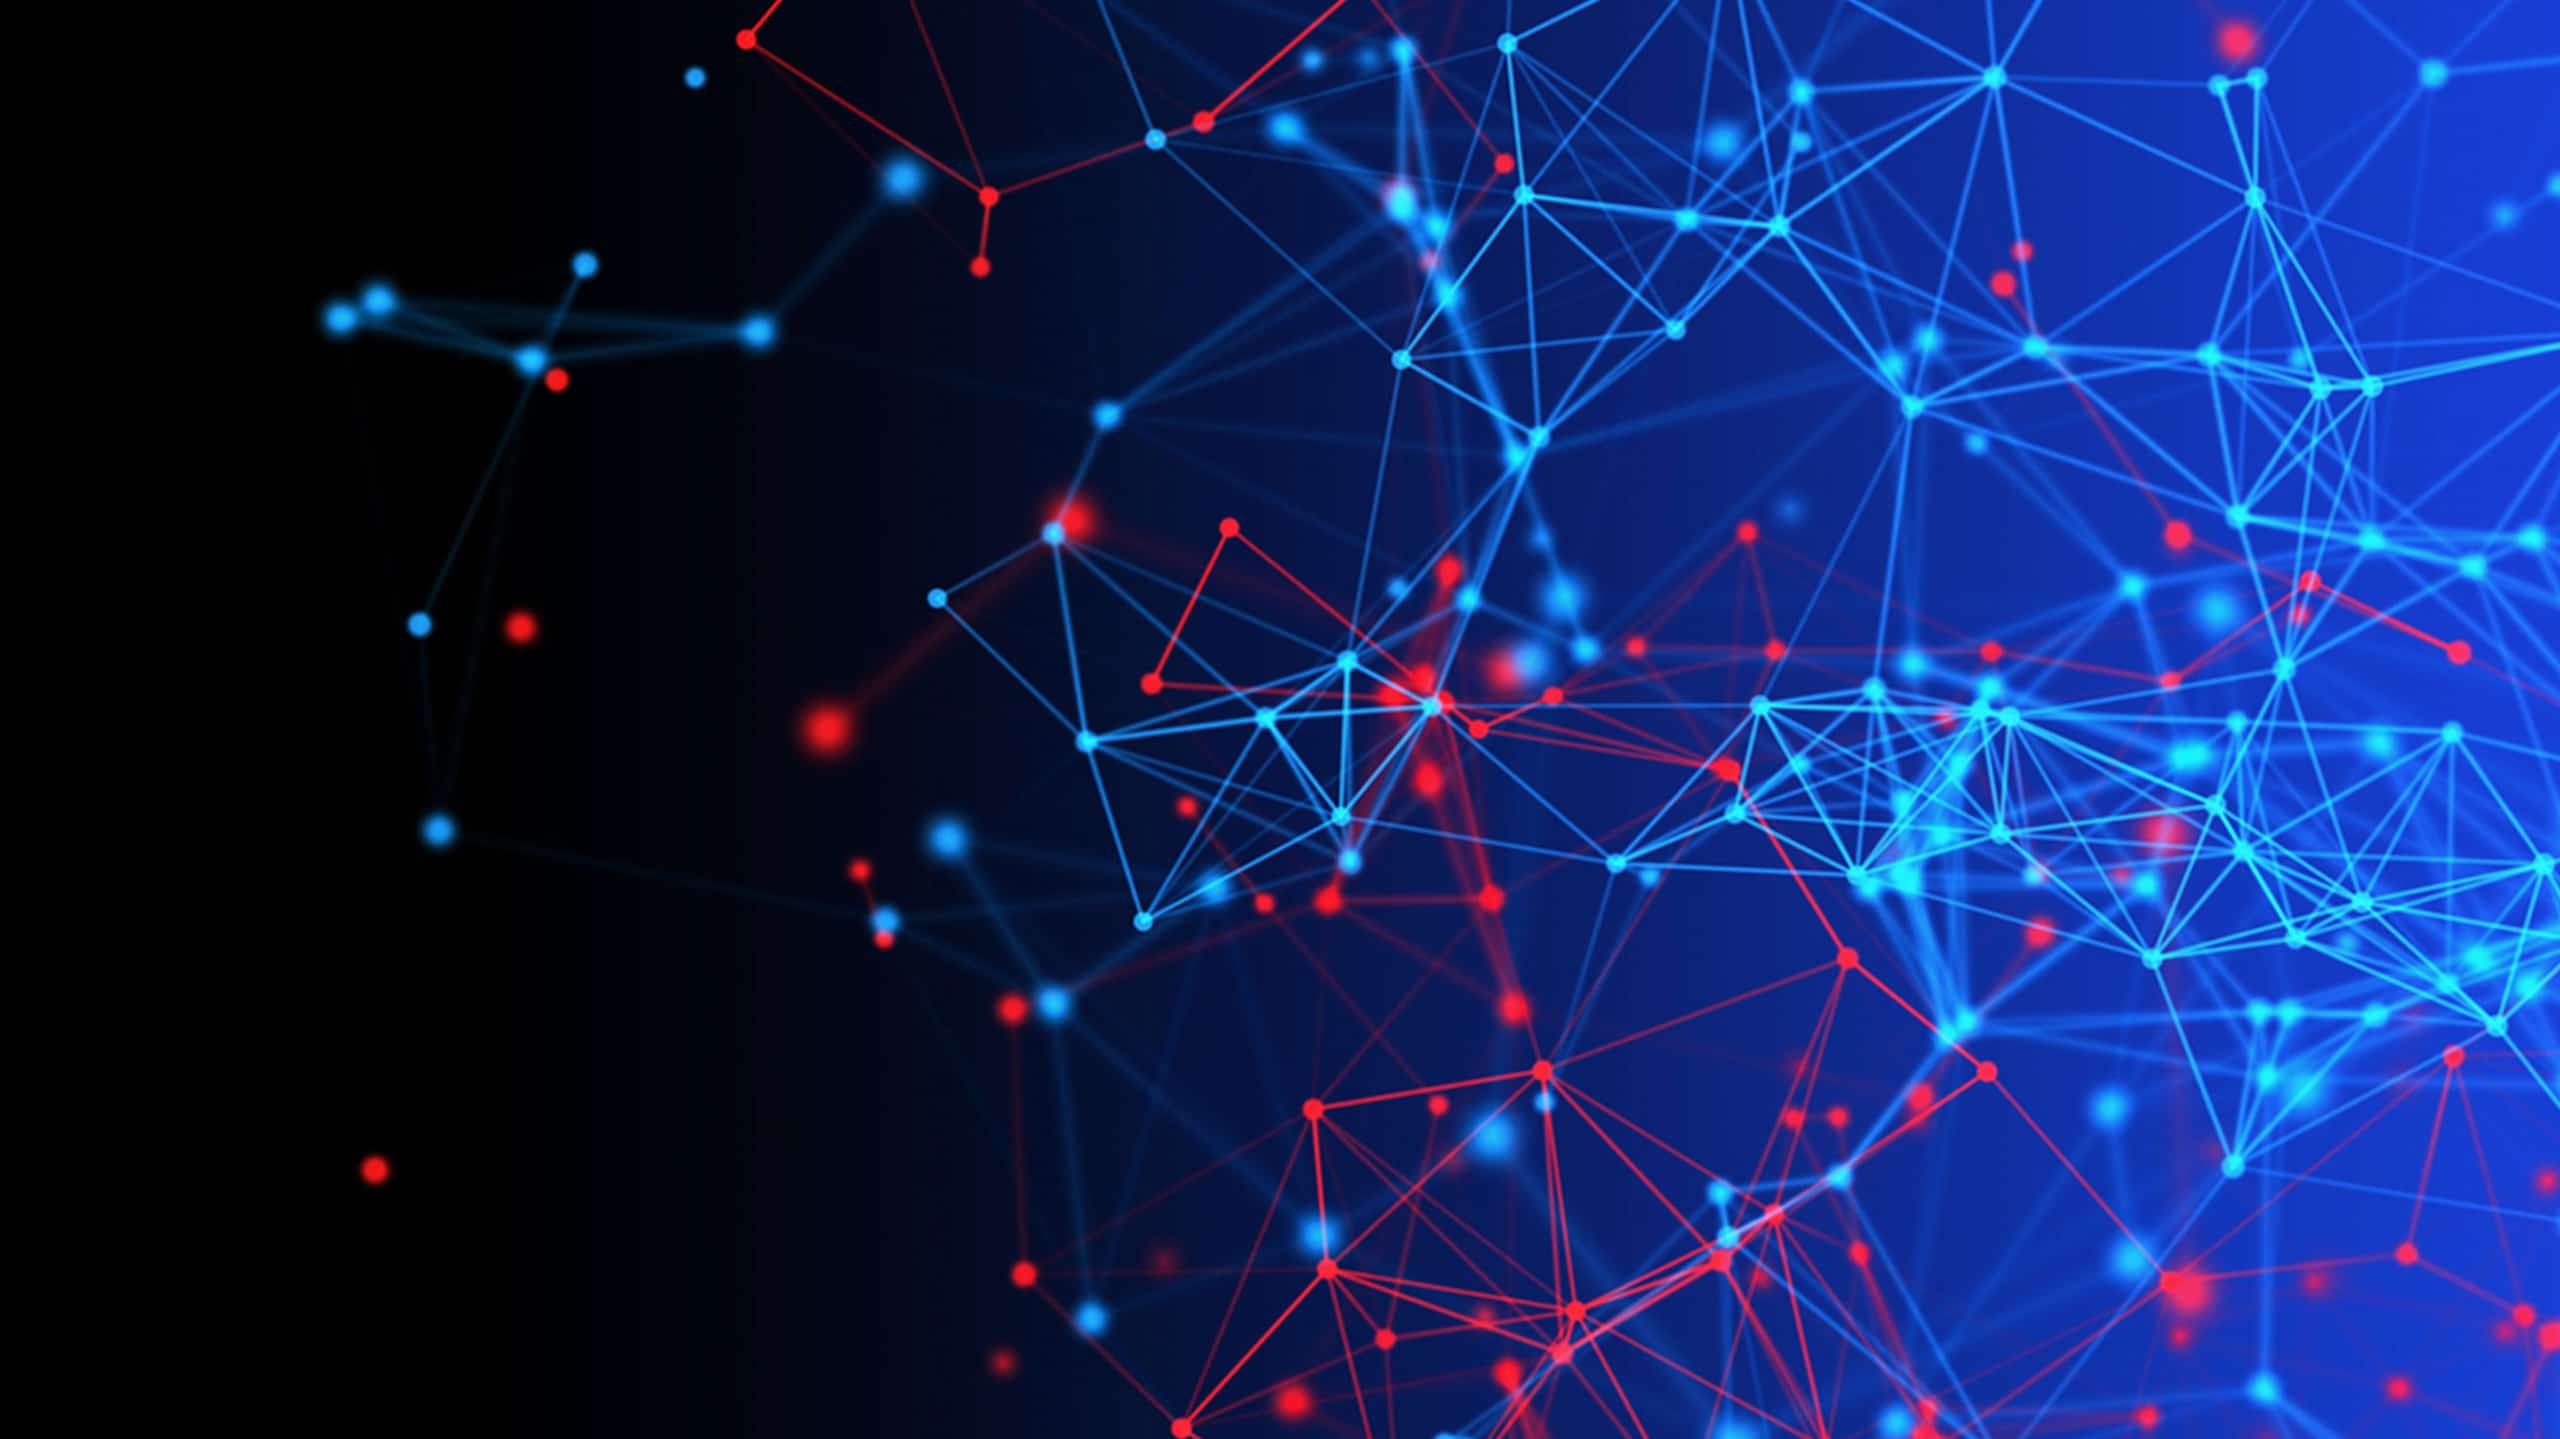 Abstract digital background depicting a network of connected lines and nodes in blue and red colors on a dark blue background, symbolizing technology and connectivity.